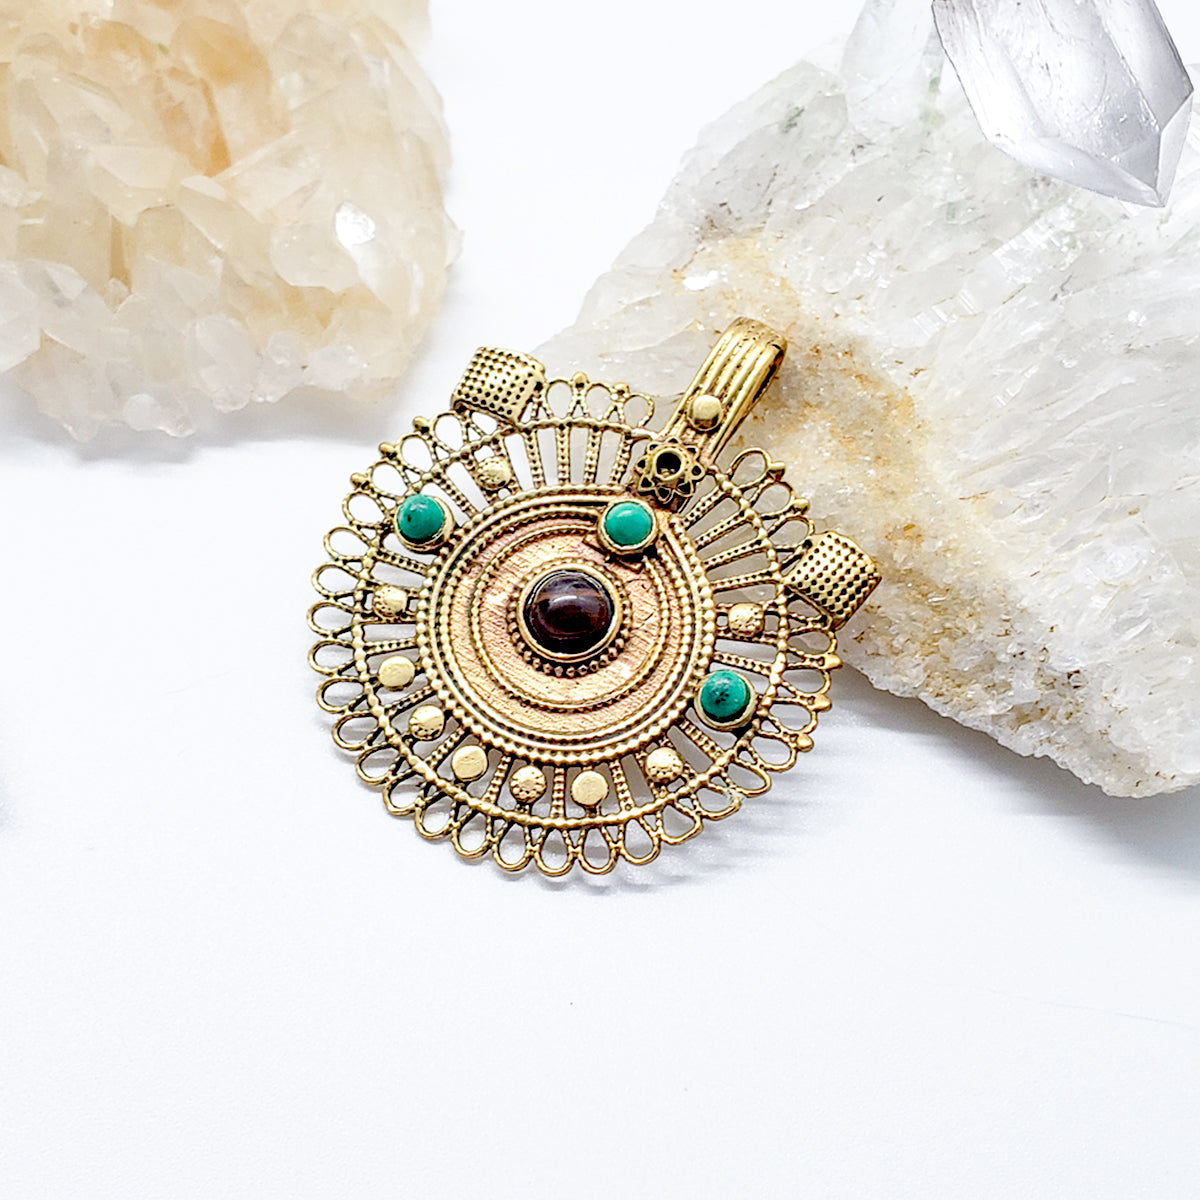 Recycled Brass Bejeweled Statement Pendant - Turquoise & Tigereye Gemstone (ONLY 1 LEFT)